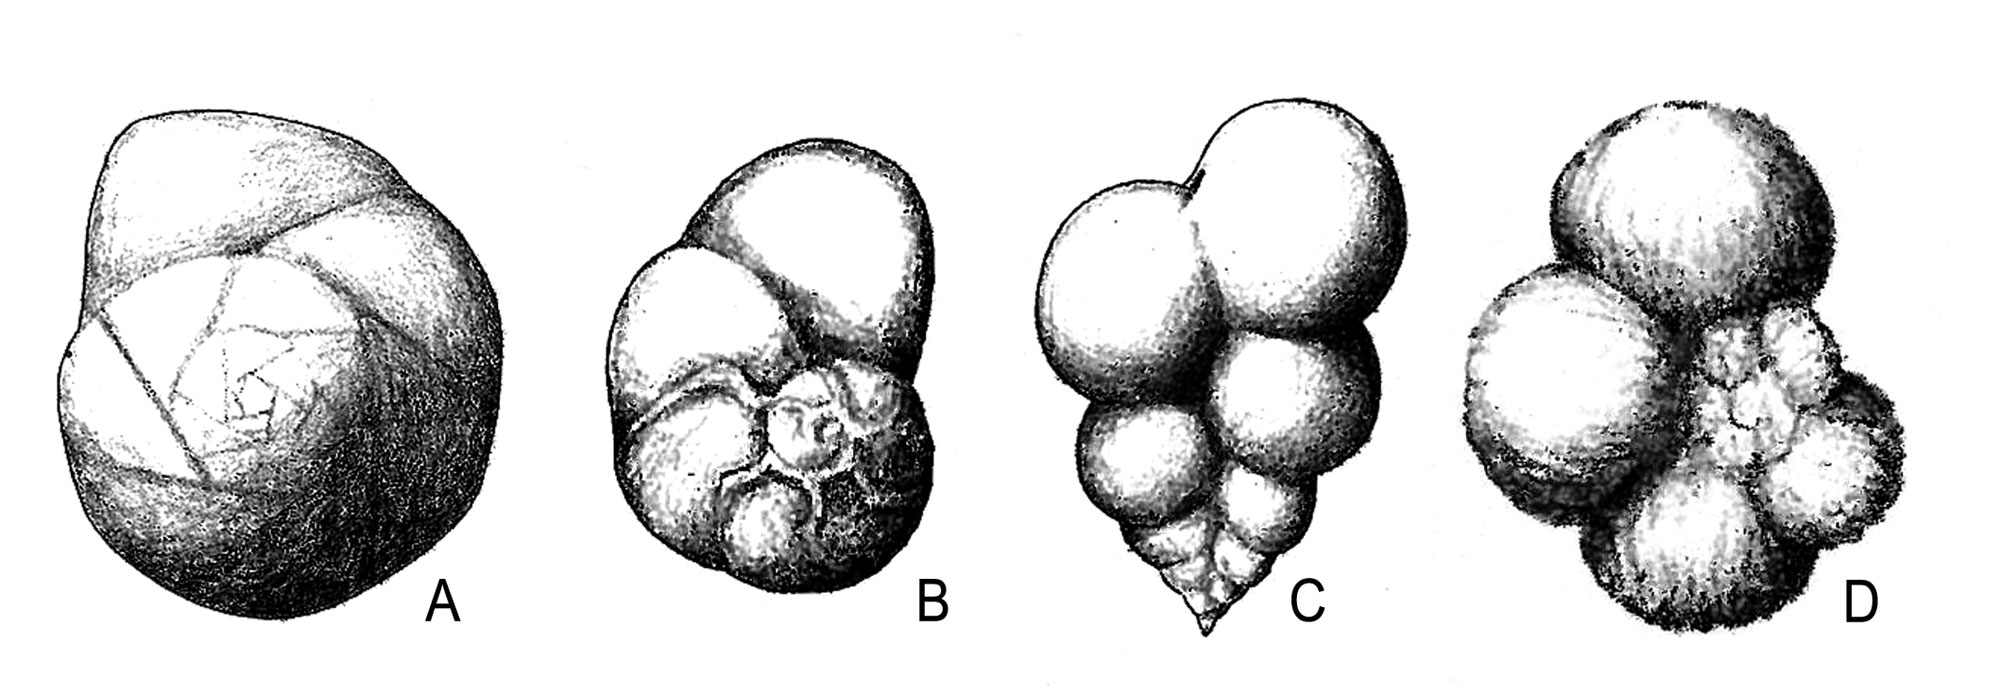 Drawings of four types of forams from the Paleogene of Texas.